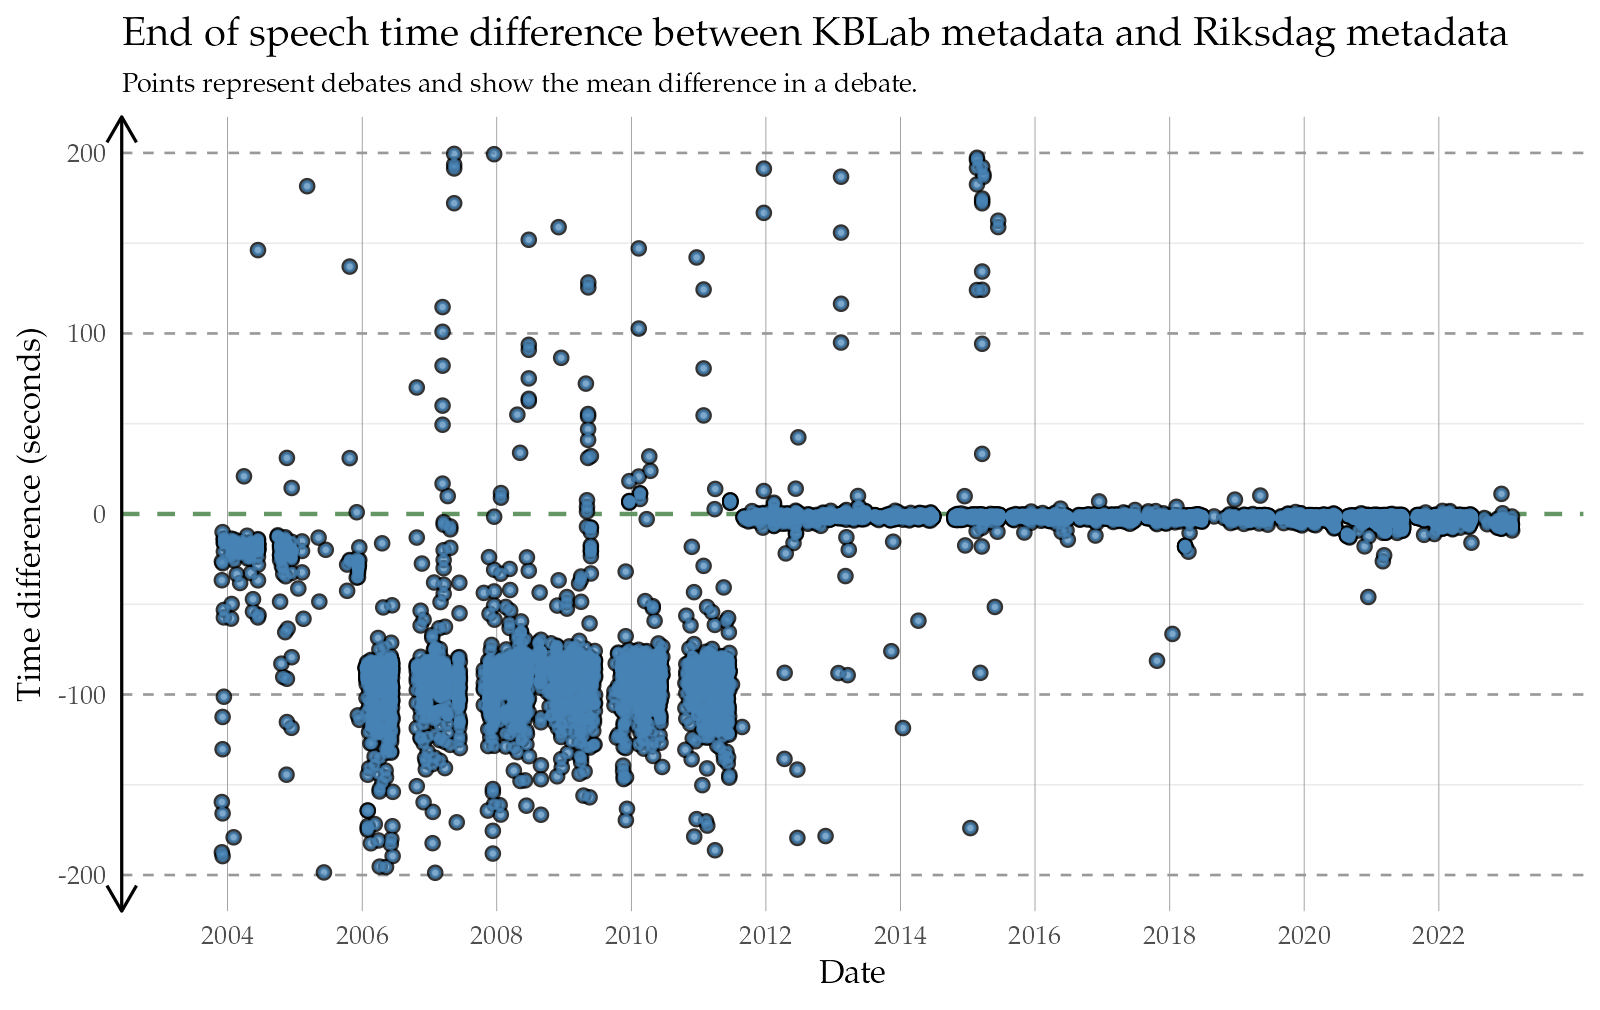 Mean difference between KBLab adjusted metadata and the Riksdag. **Left** plot shows the difference between 'start' metata, and the **right** plot the difference between 'end' metadata. In general the Riksdag's start markers tend to bias towards beginning a few seconds before the actual speech, and ending later than the actual ending. The plot shows a zoomed in view between -200 and +200 seconds to emphasize general trends. There also exist debates for which the metadata is off by thousands of seconds.